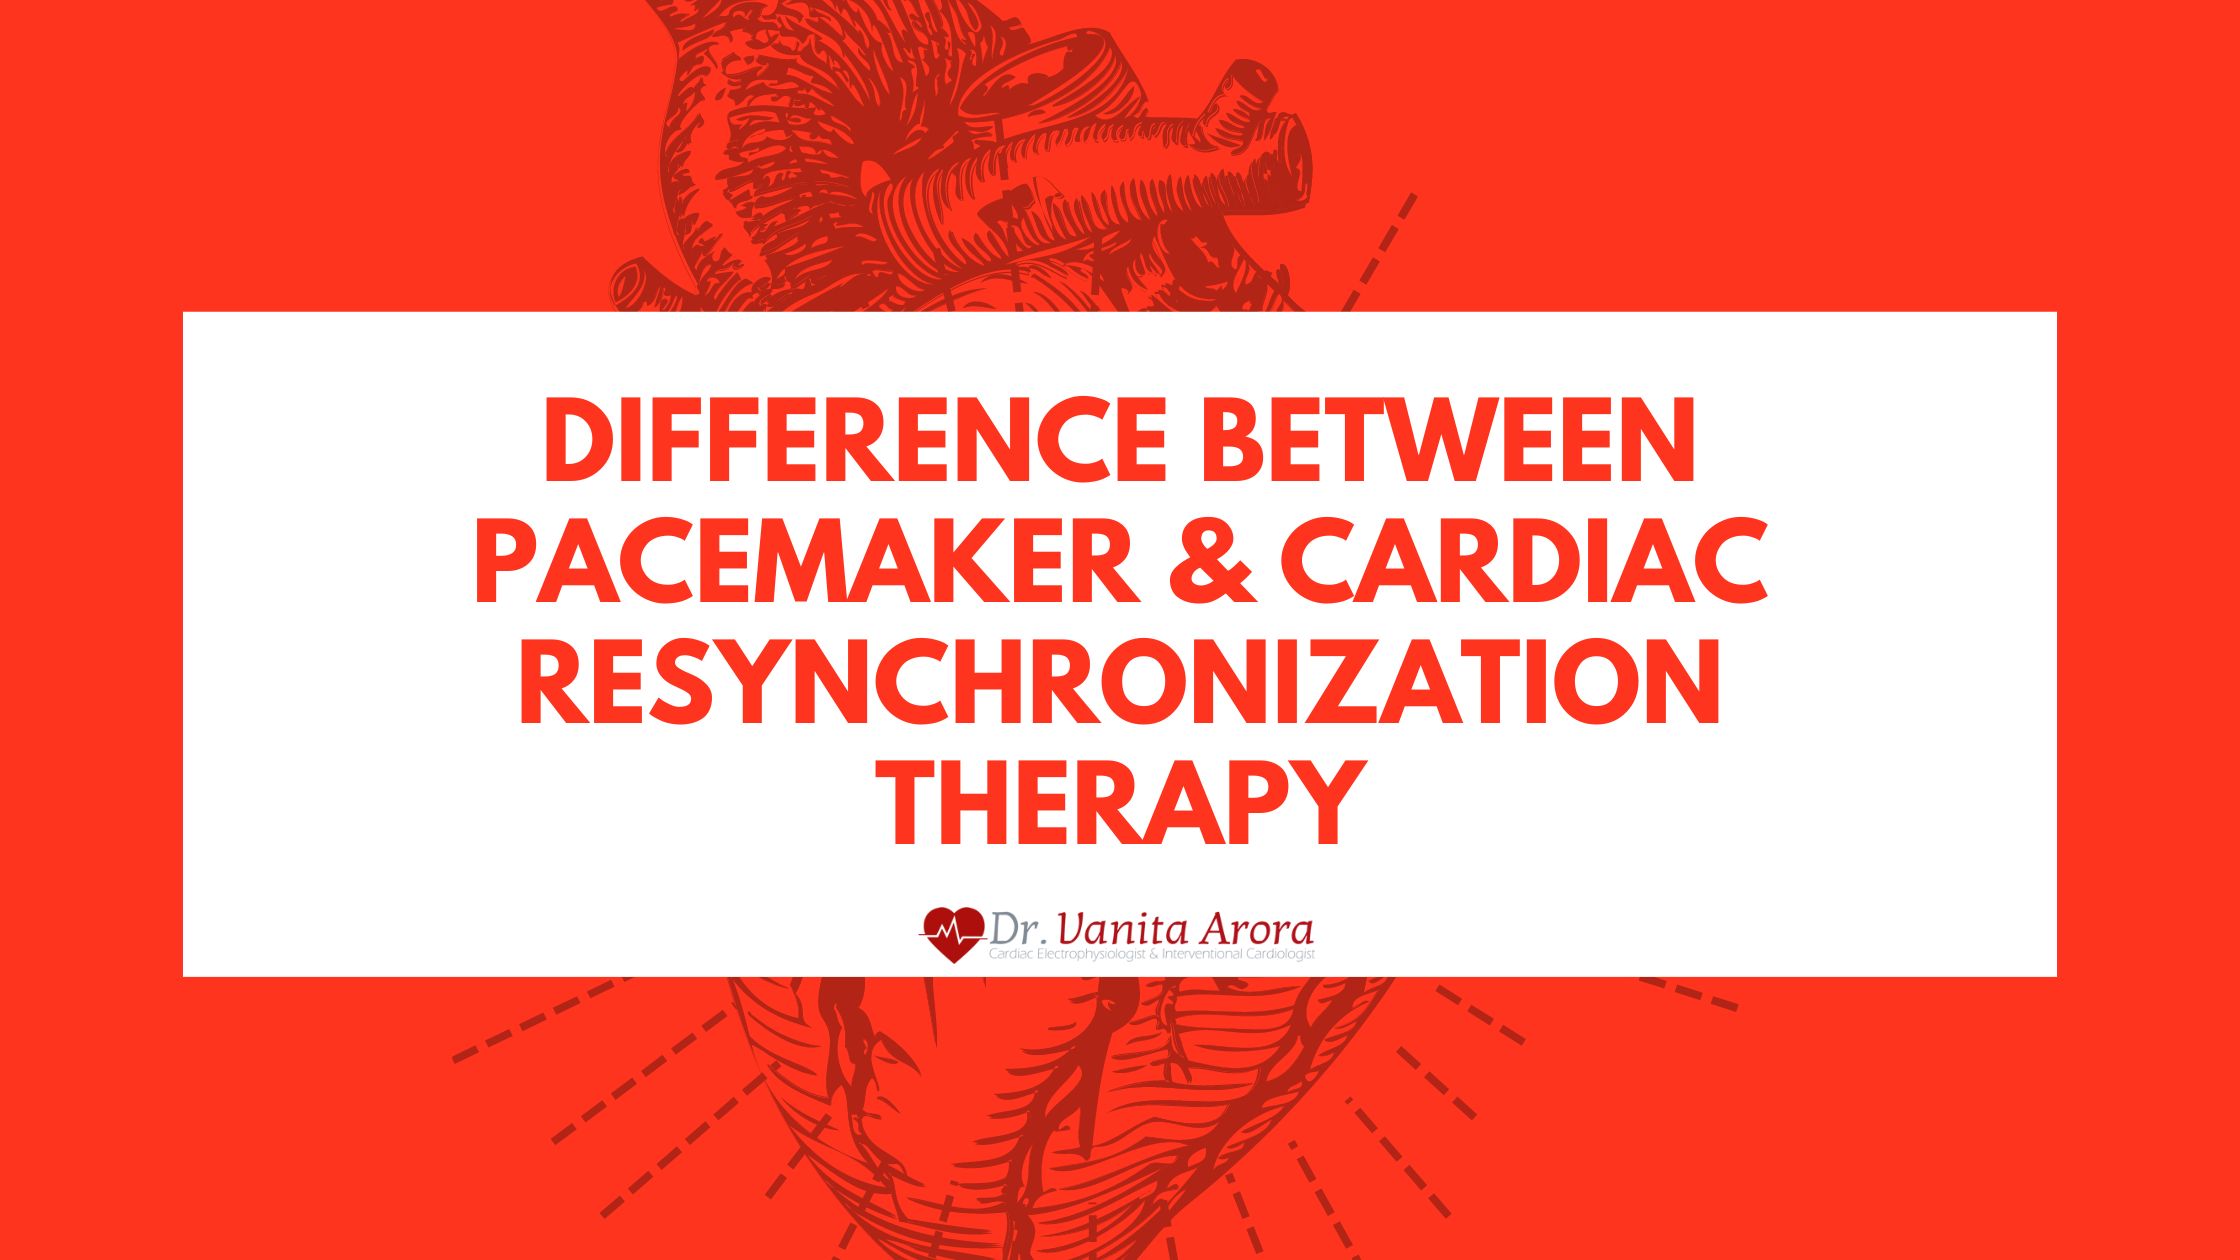 Difference Between Pacemaker & Cardiac Resynchronization Therapy